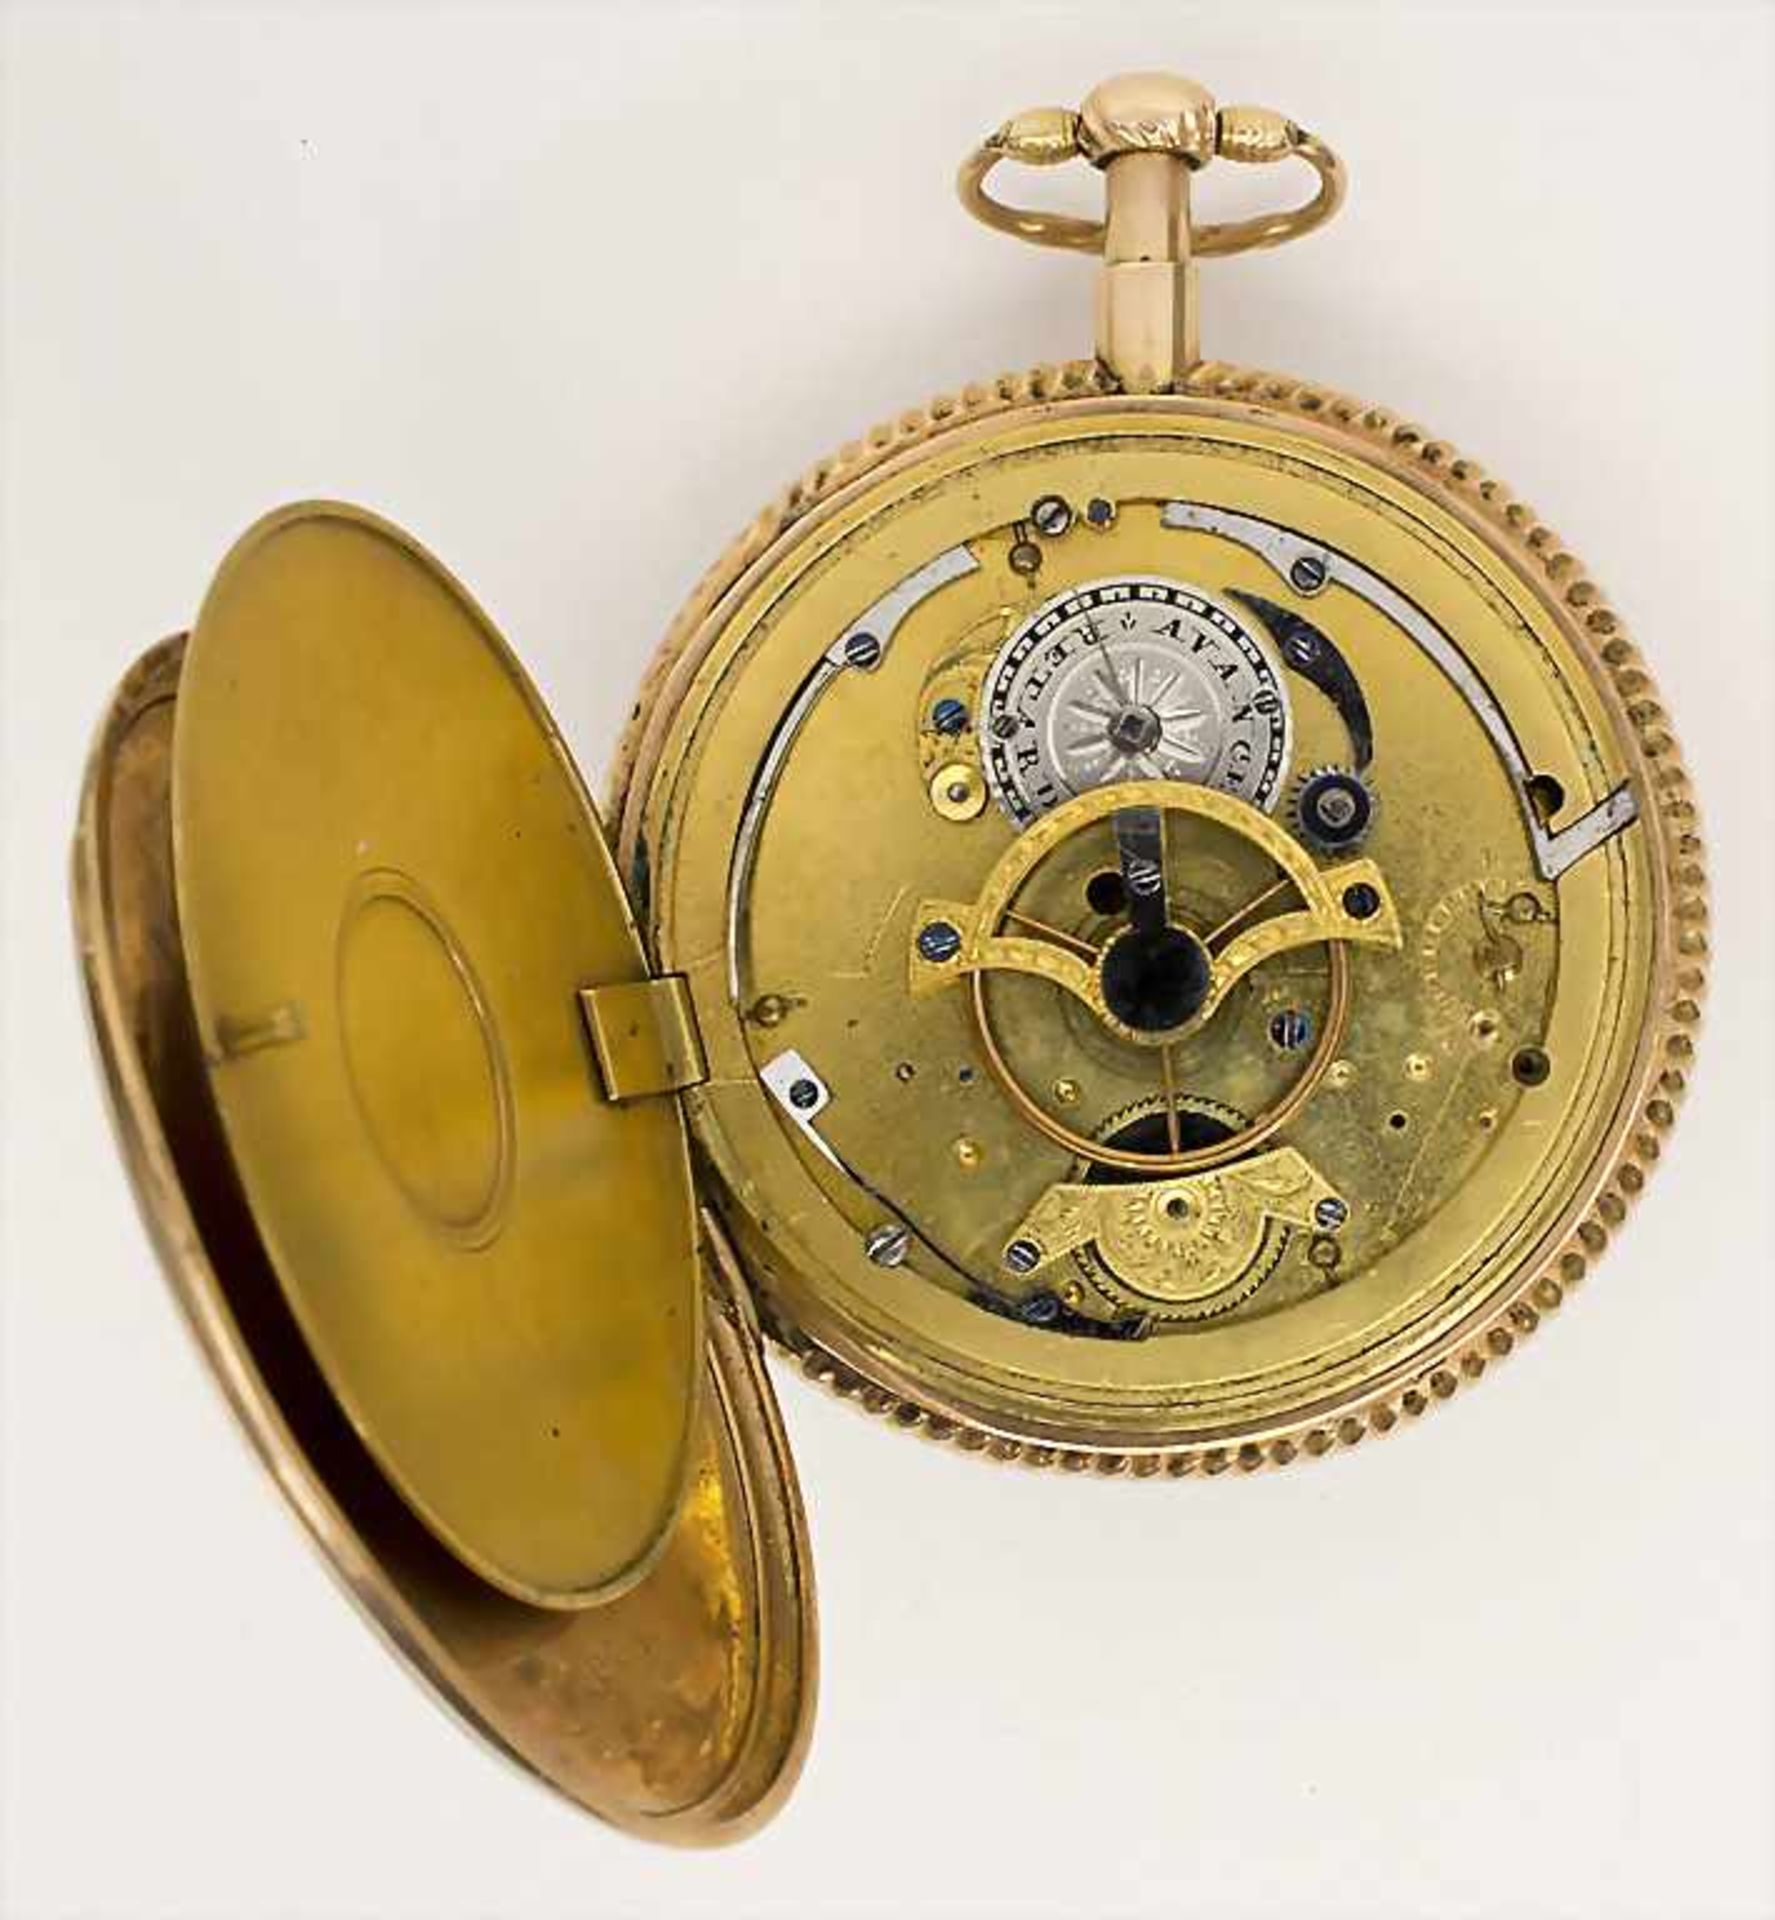 Offene Taschenuhr mit 1/4 Repetition und Kalender / A pocket watch 1/4 quarter repeater with - Image 3 of 4